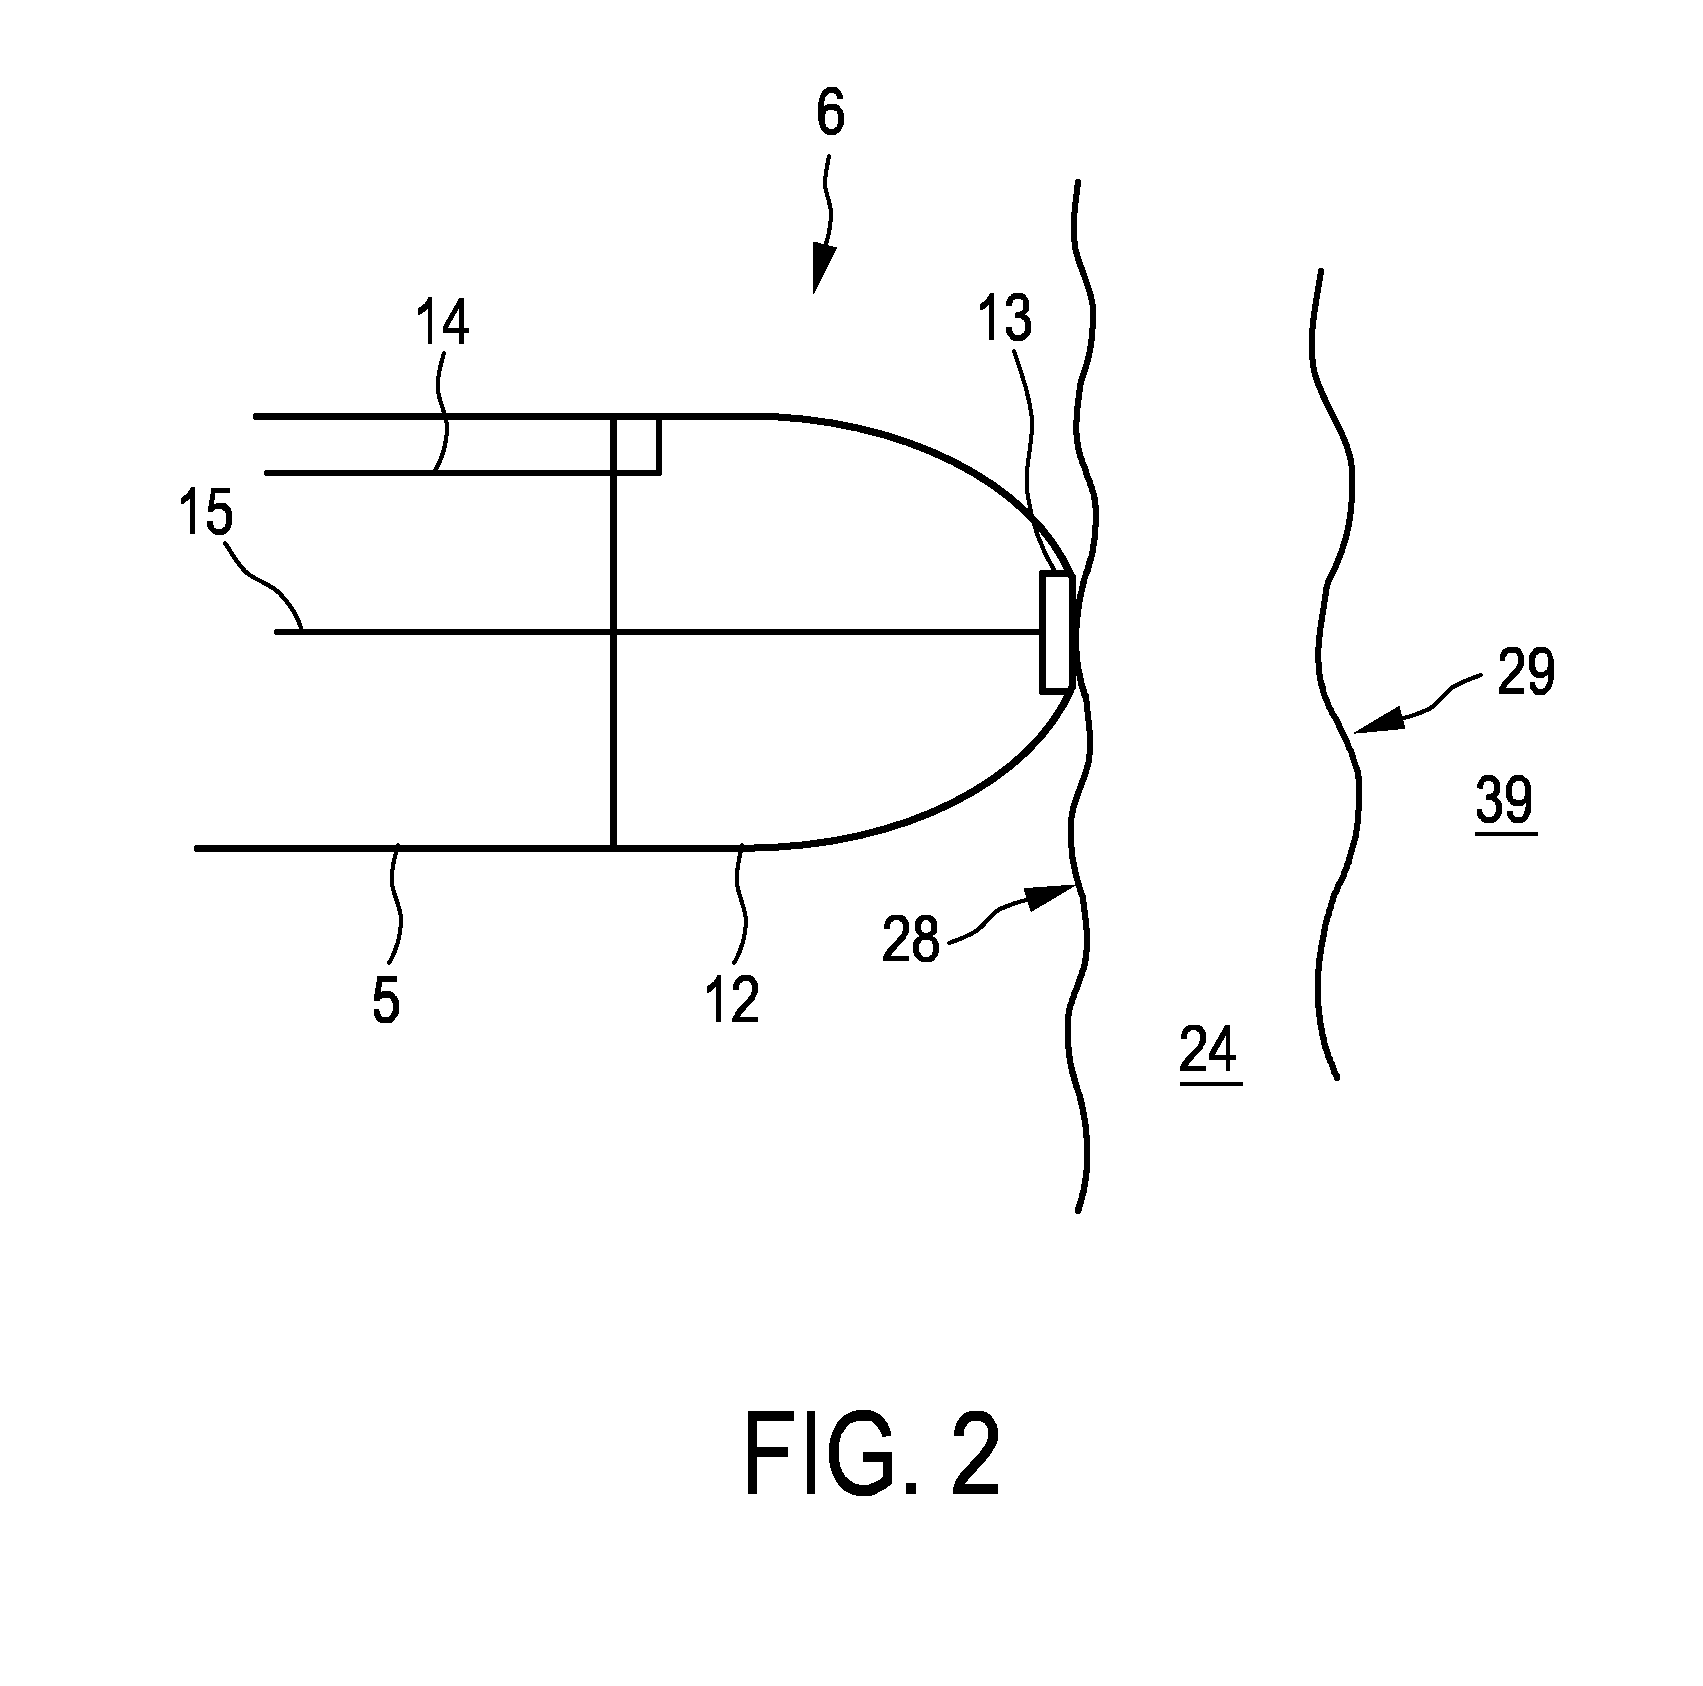 Imaging system for imaging a periodically moving object